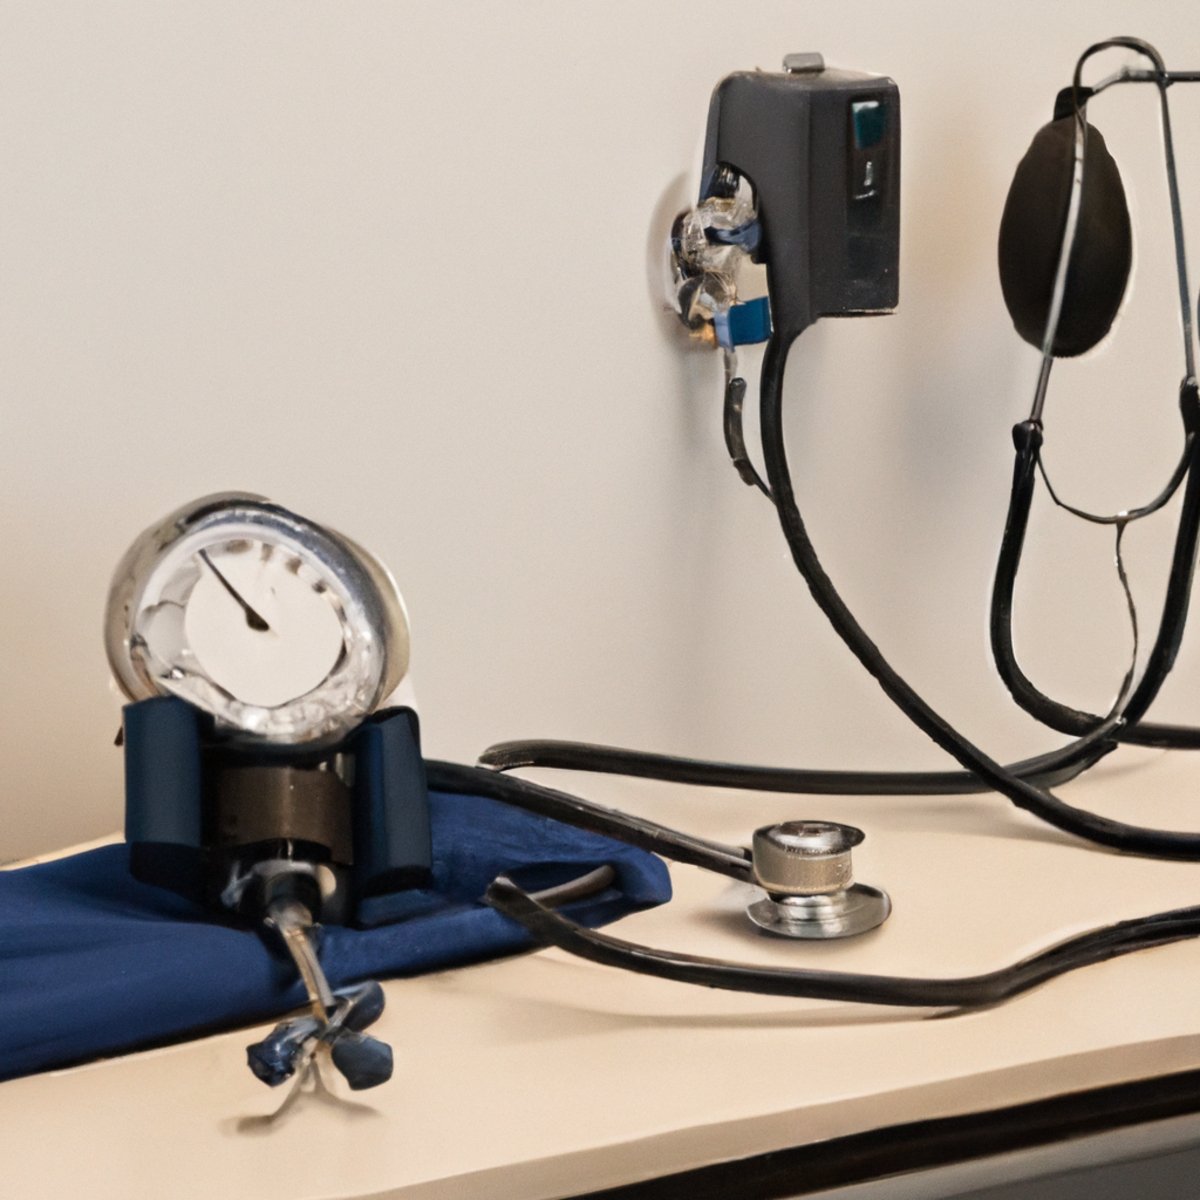 Medical equipment and tools in an organized examination room, highlighting the connection between Felty Syndrome and Rheumatoid Arthritis.